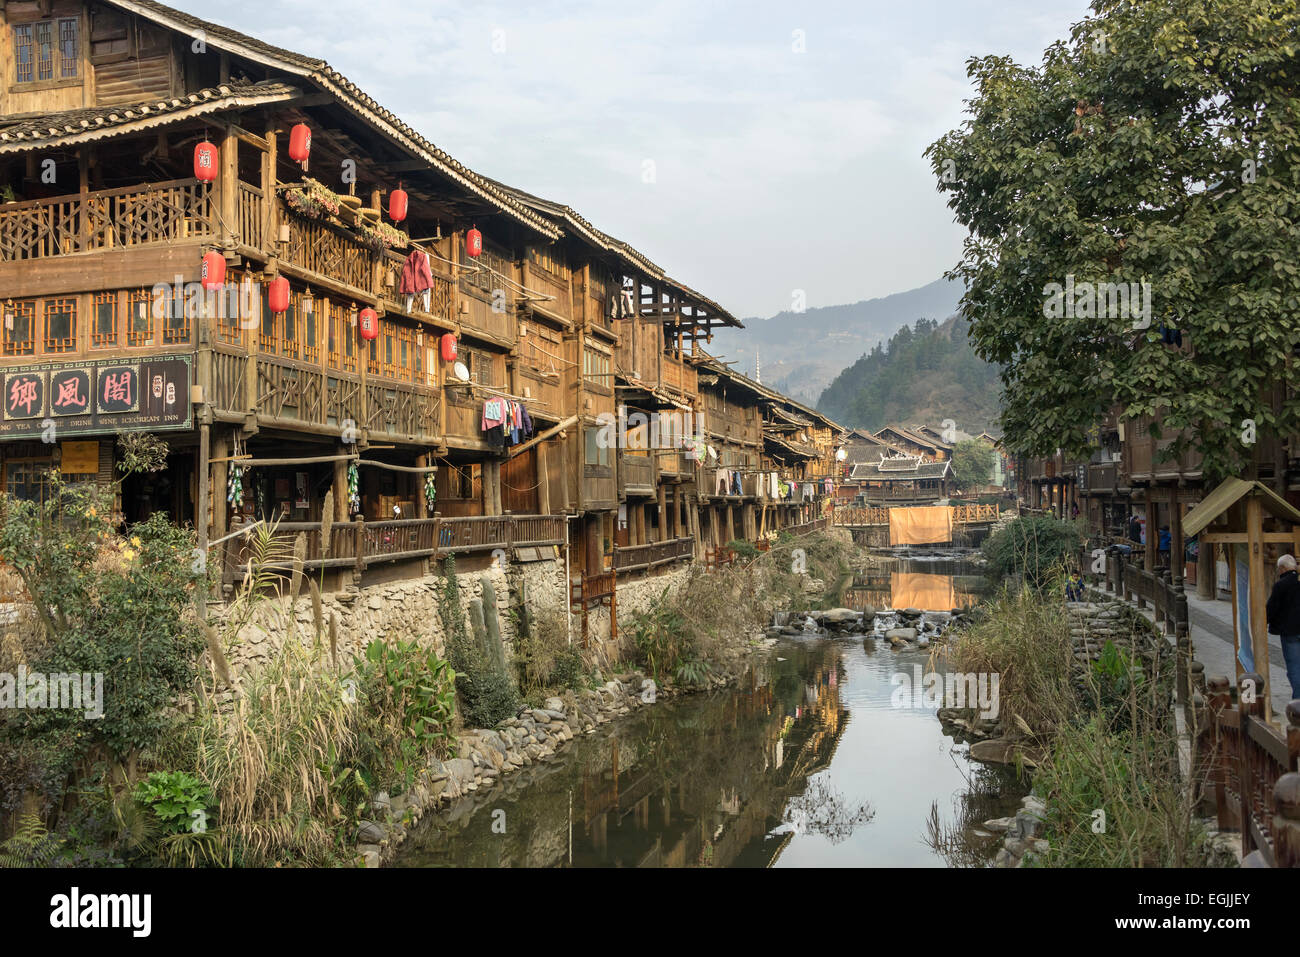 Dong village with stilt houses and reflections on a small river, Zhaoxing Dong village, Guizhou Province, China Stock Photo